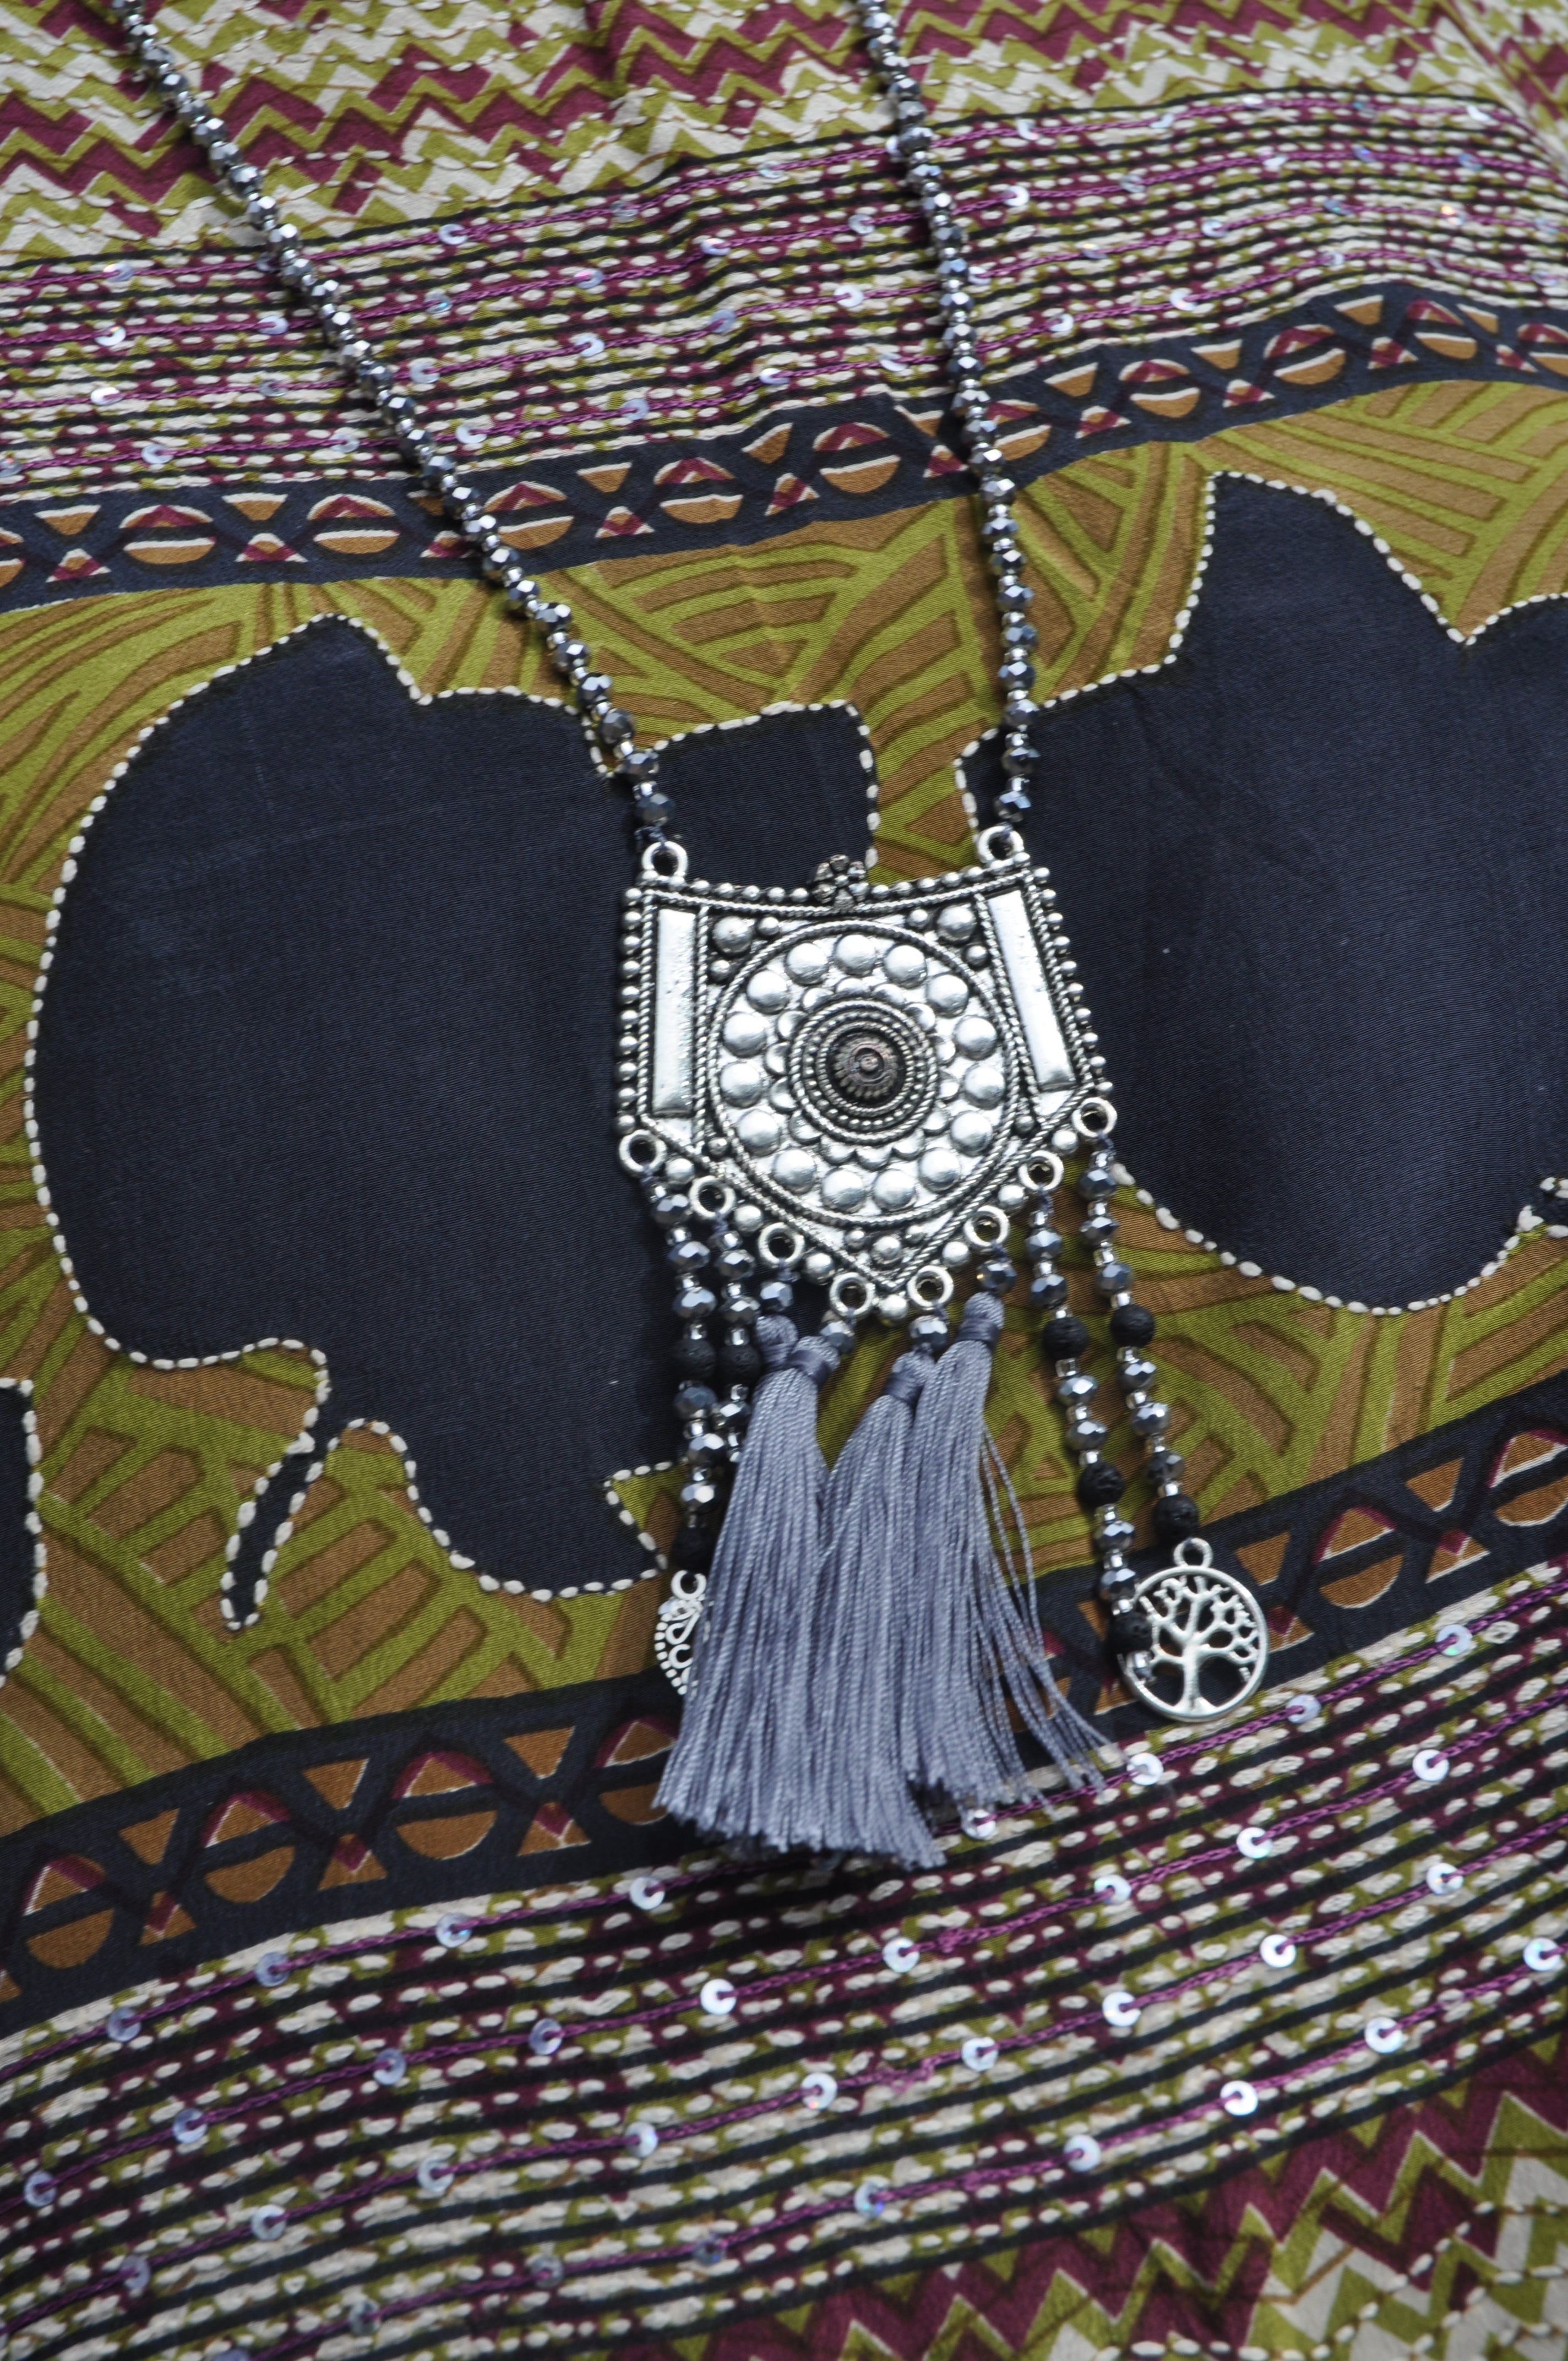 Long Crystal Grey Necklace with With Patterned Metal Pendant